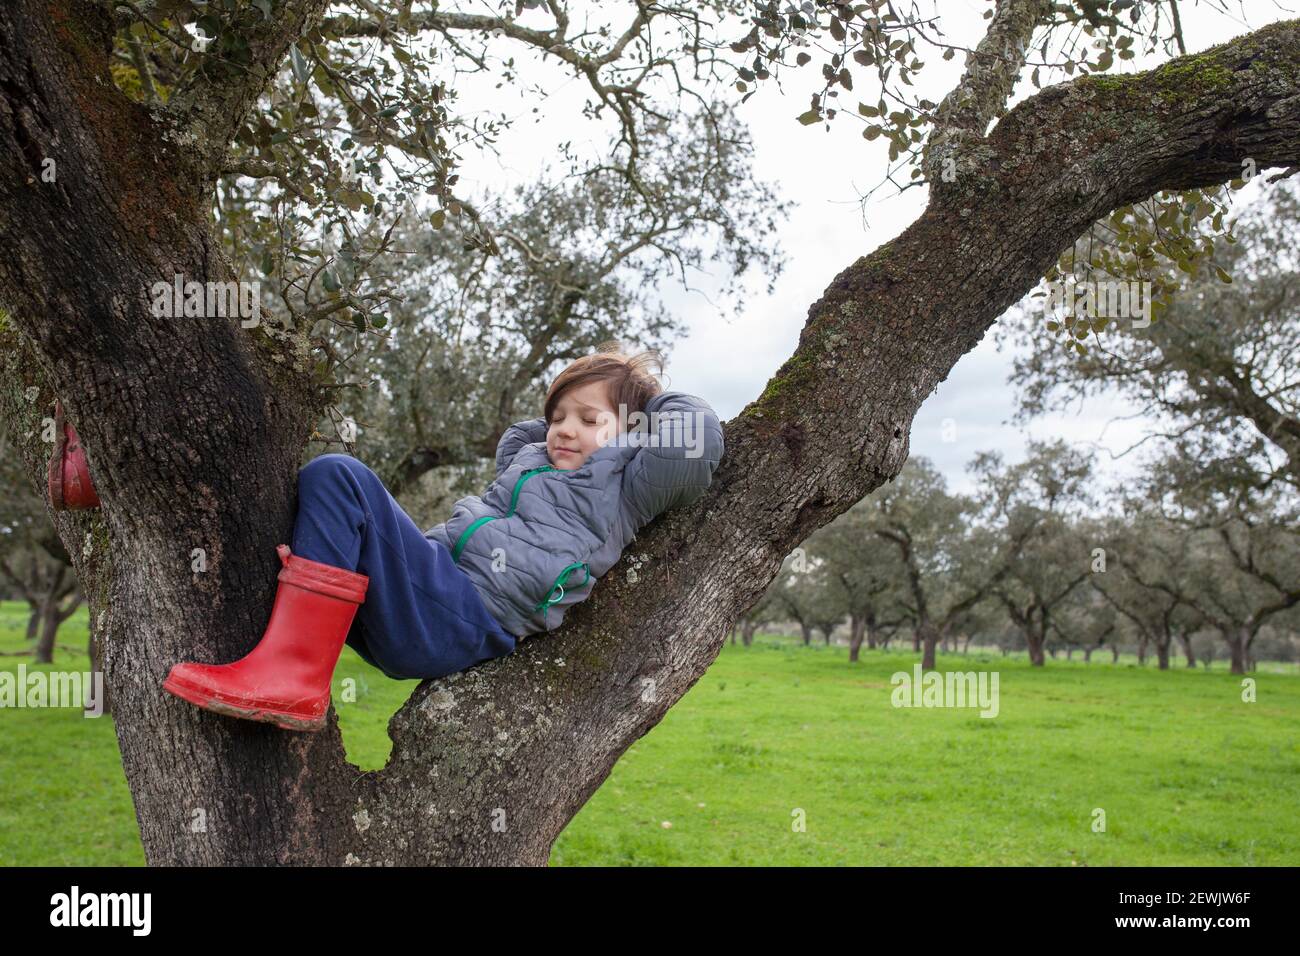 Child boy sleeping over tree after intense journey in nature. Children discover nature concept. Stock Photo